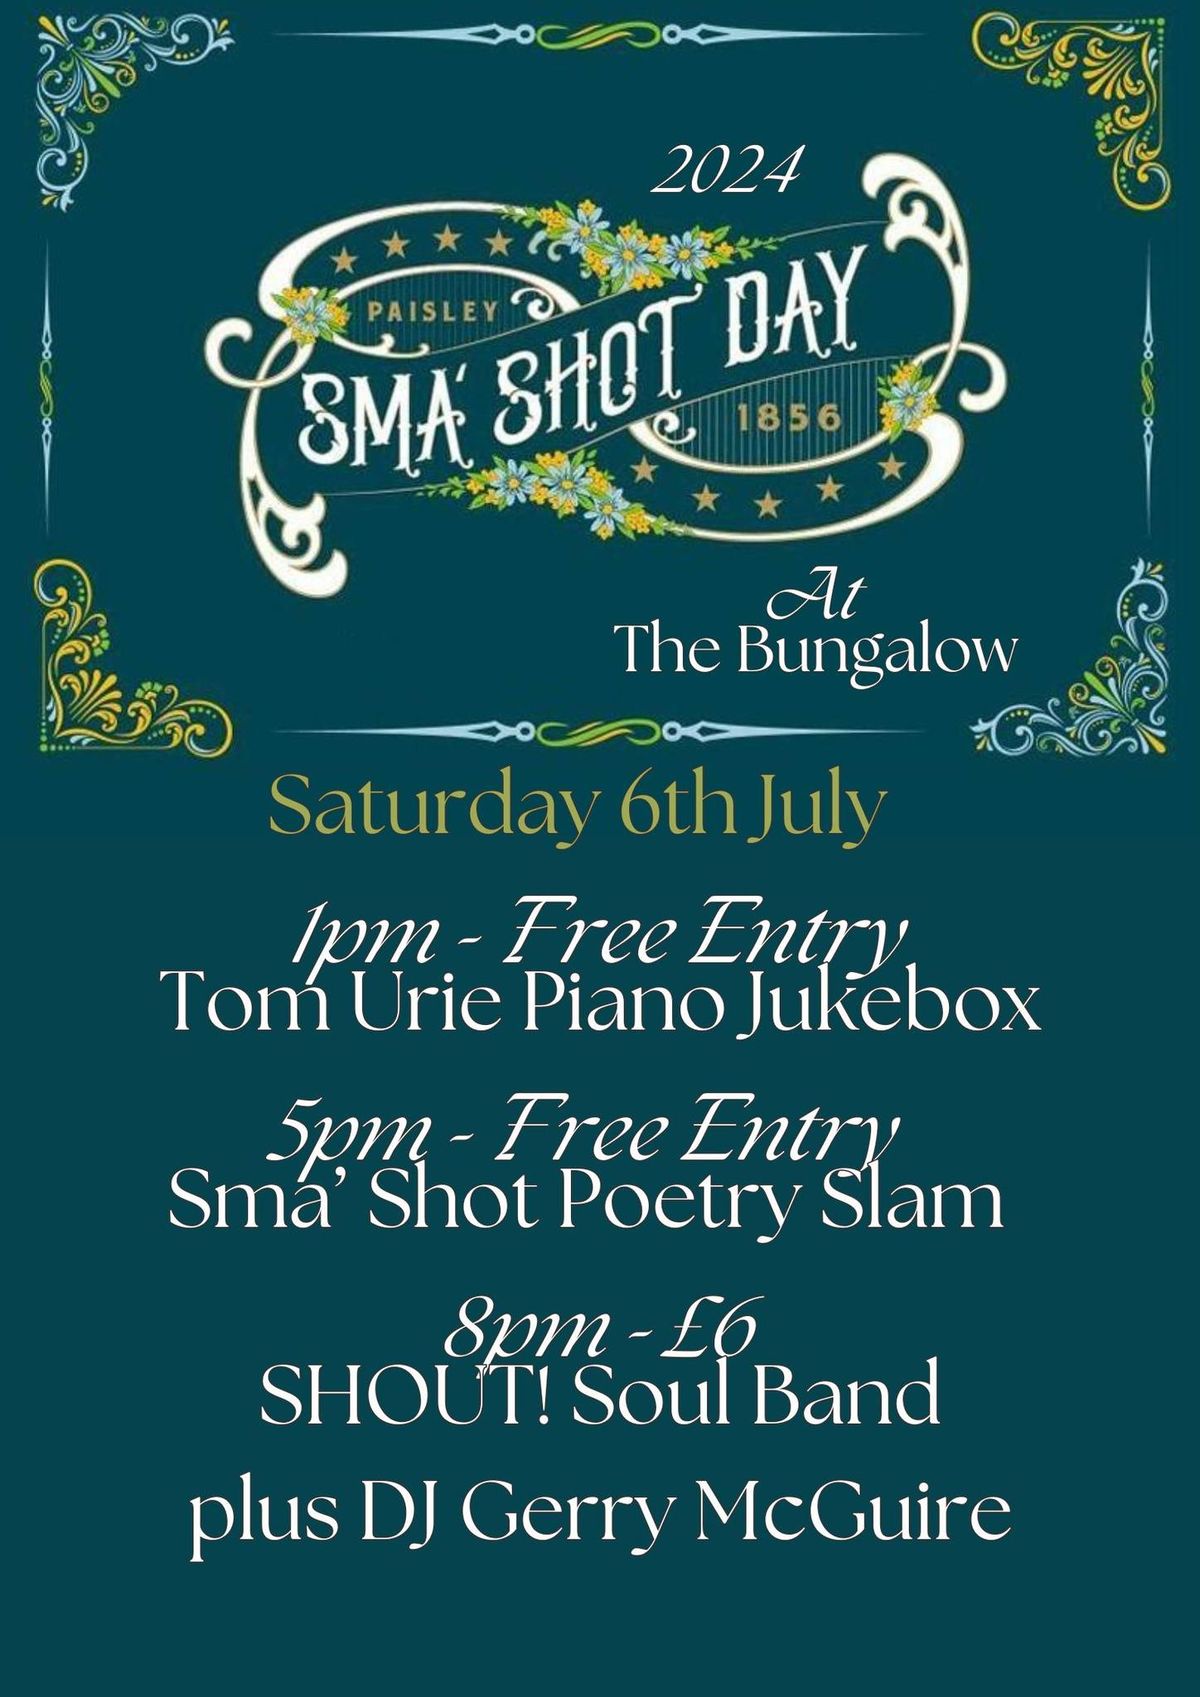 Featuring Tom Urie 1pm FREE ENTRY\/Shaun Moore Poetry Slam 5pm FREE ENTRY\/SHOUT! plus Gerry McGuire\u00a36